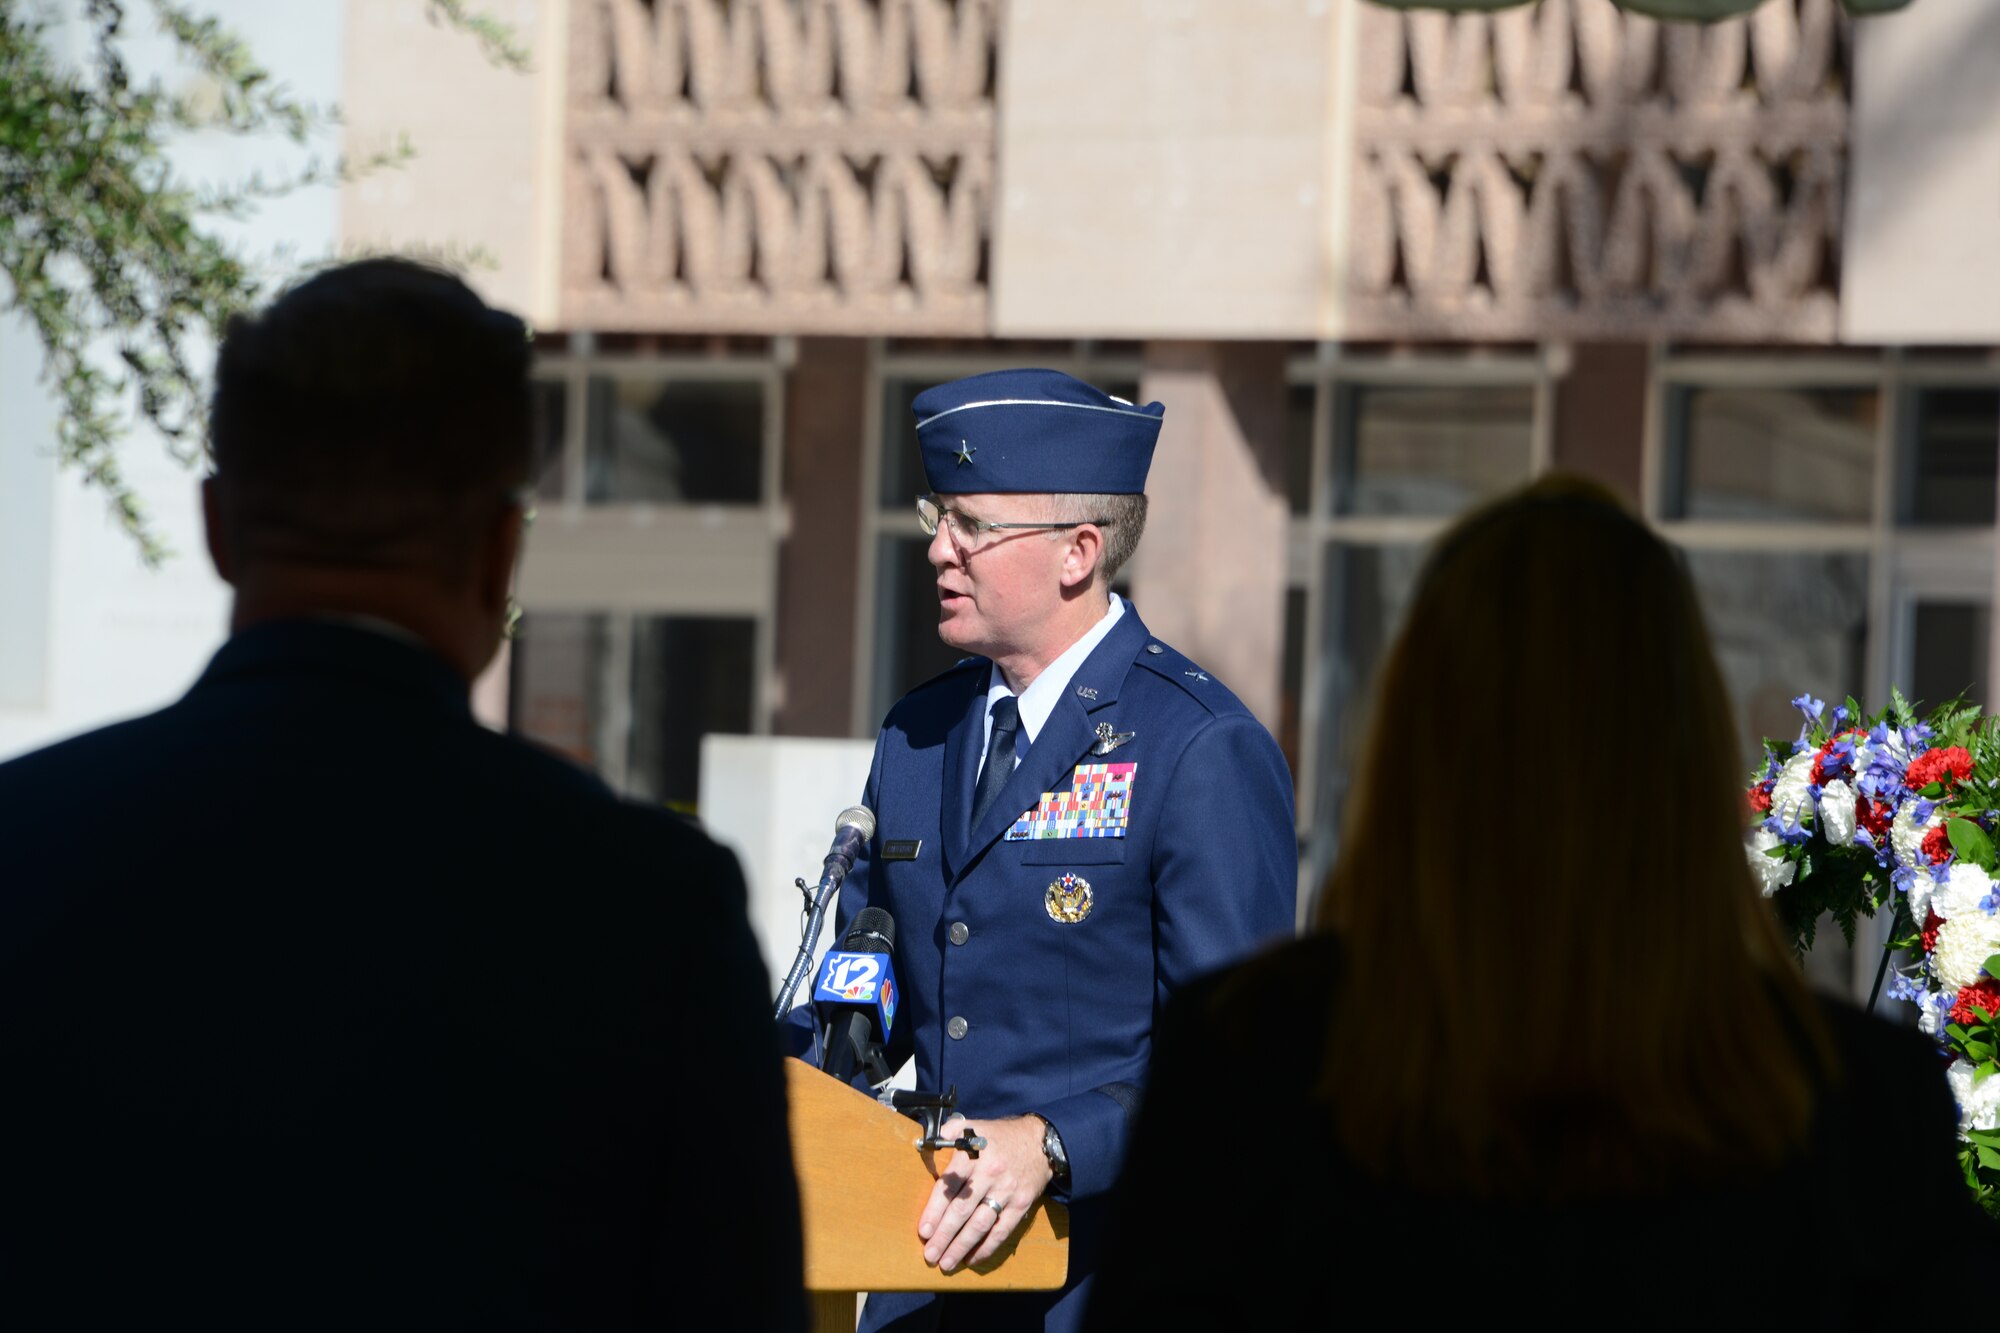 Brig. Gen. Todd Canterbury, 56th Fighter Wing commander, gives his remarks at the 100th Anniversary of the death of Lt. Frank Luke Jr. ceremony, Sept. 26, 2018 in Phoenix.